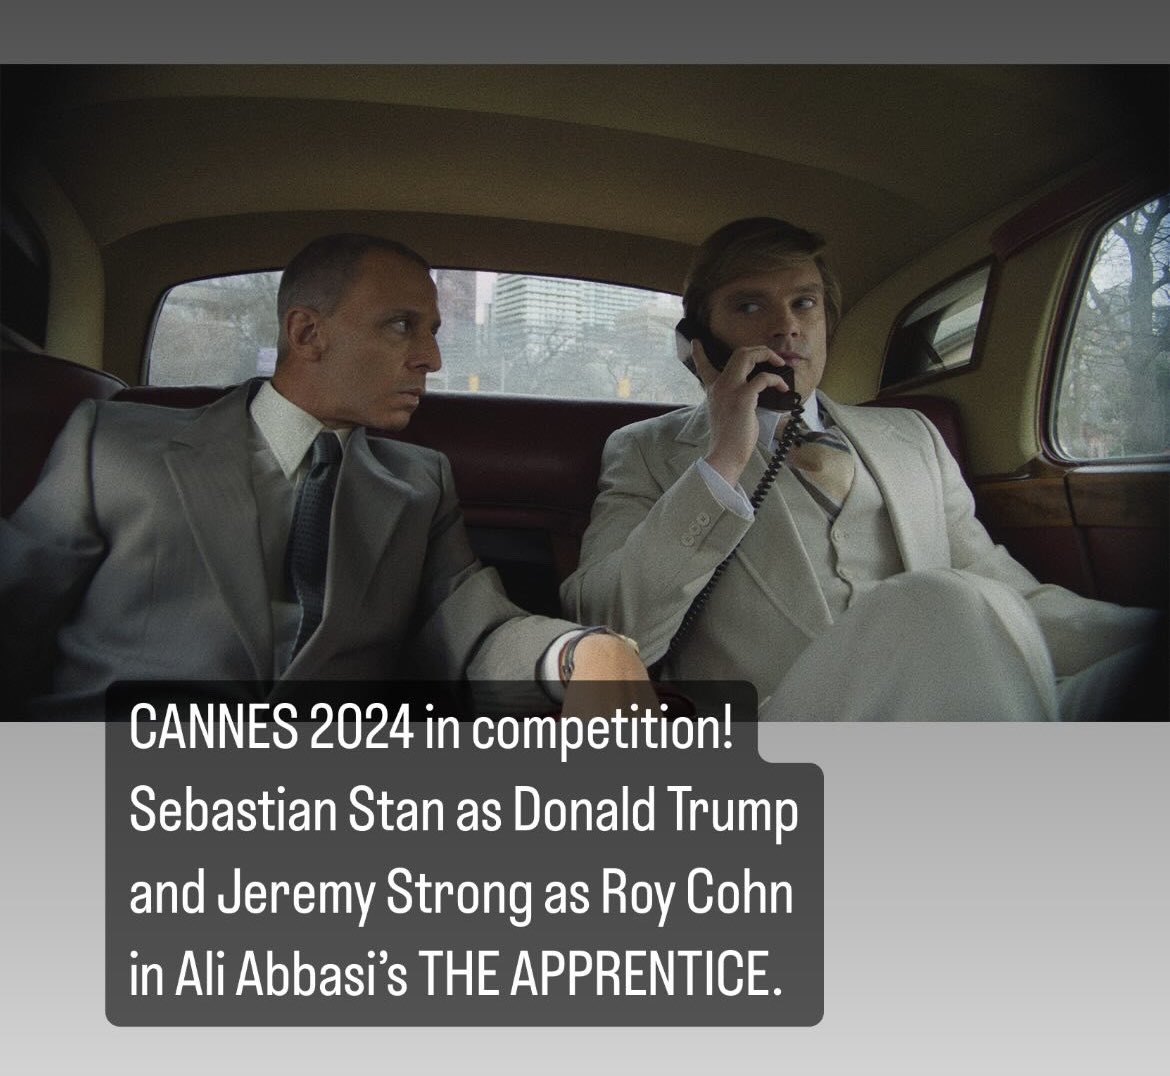 FIRST-LOOK IMAGE: Sebastian Stan as Donald Trump and Jeremy Strong as Roy Cohn in Ali Abbasi’s THE APPRENTICE, in competition at #Cannes2024